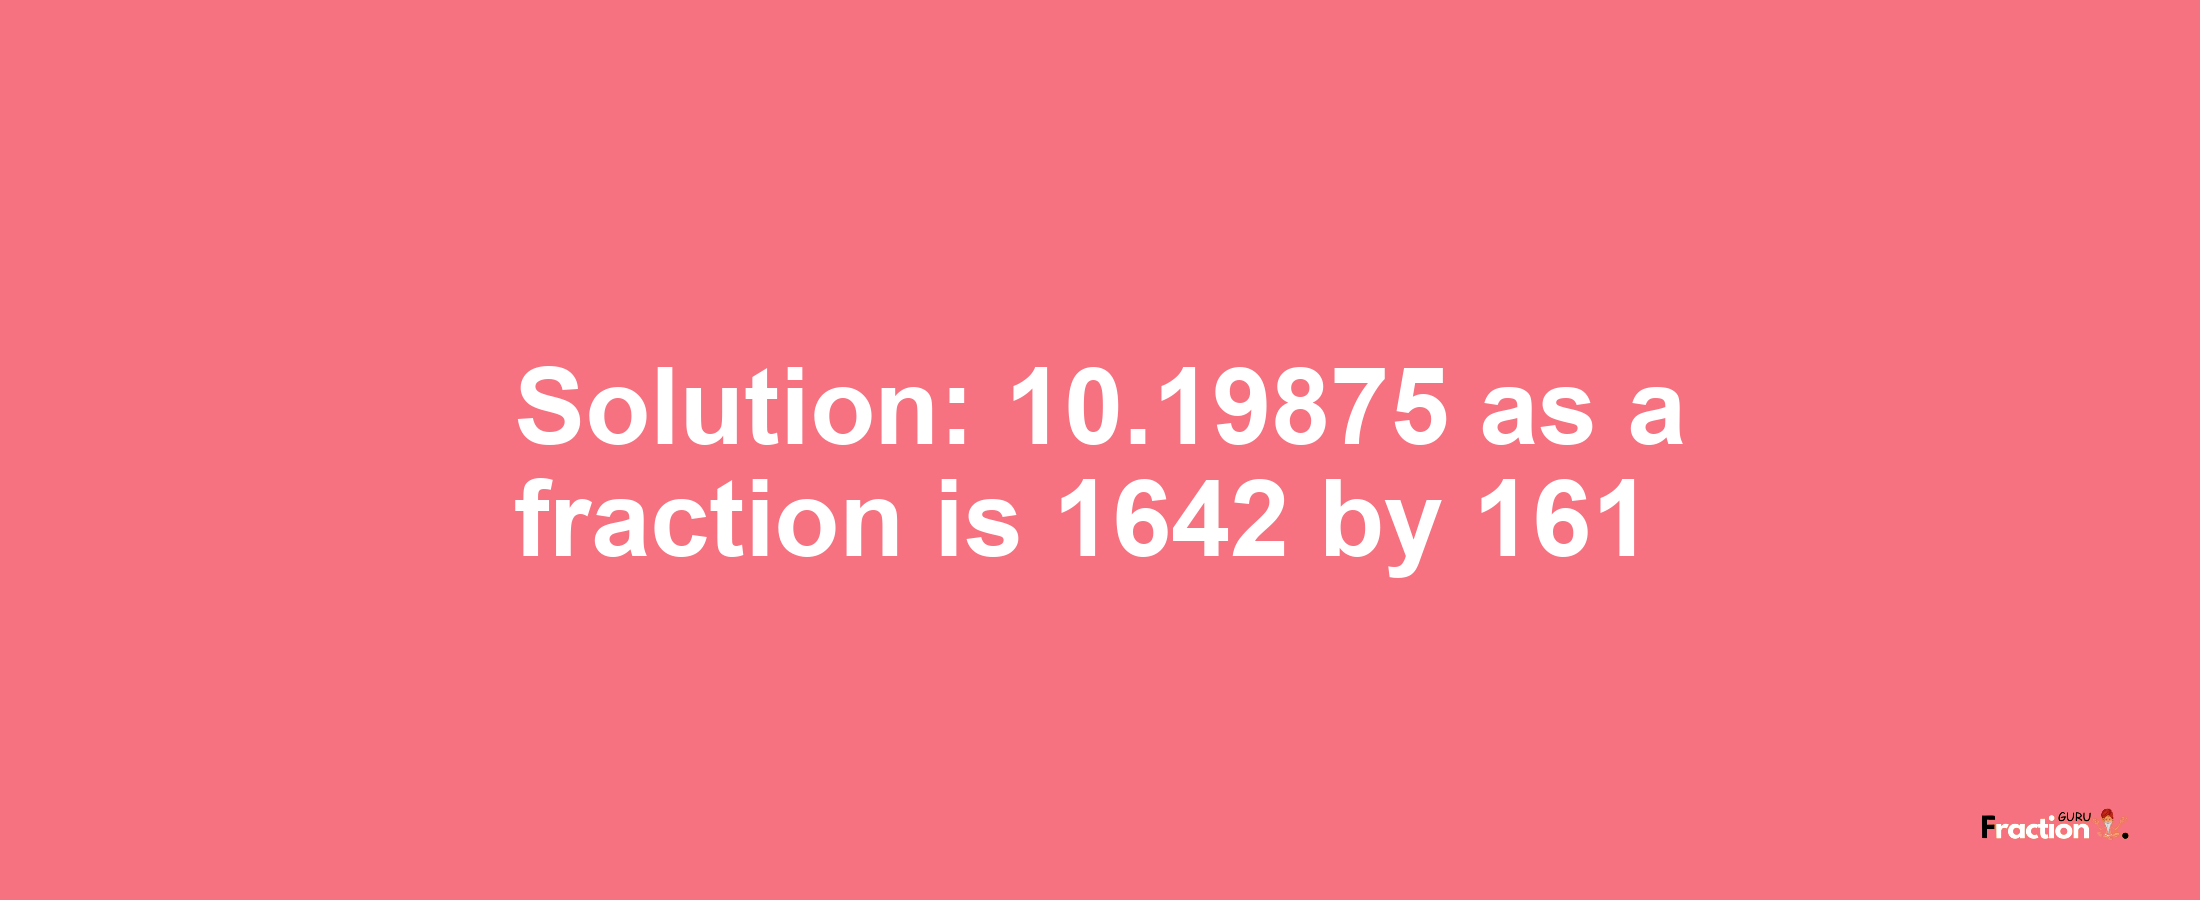 Solution:10.19875 as a fraction is 1642/161